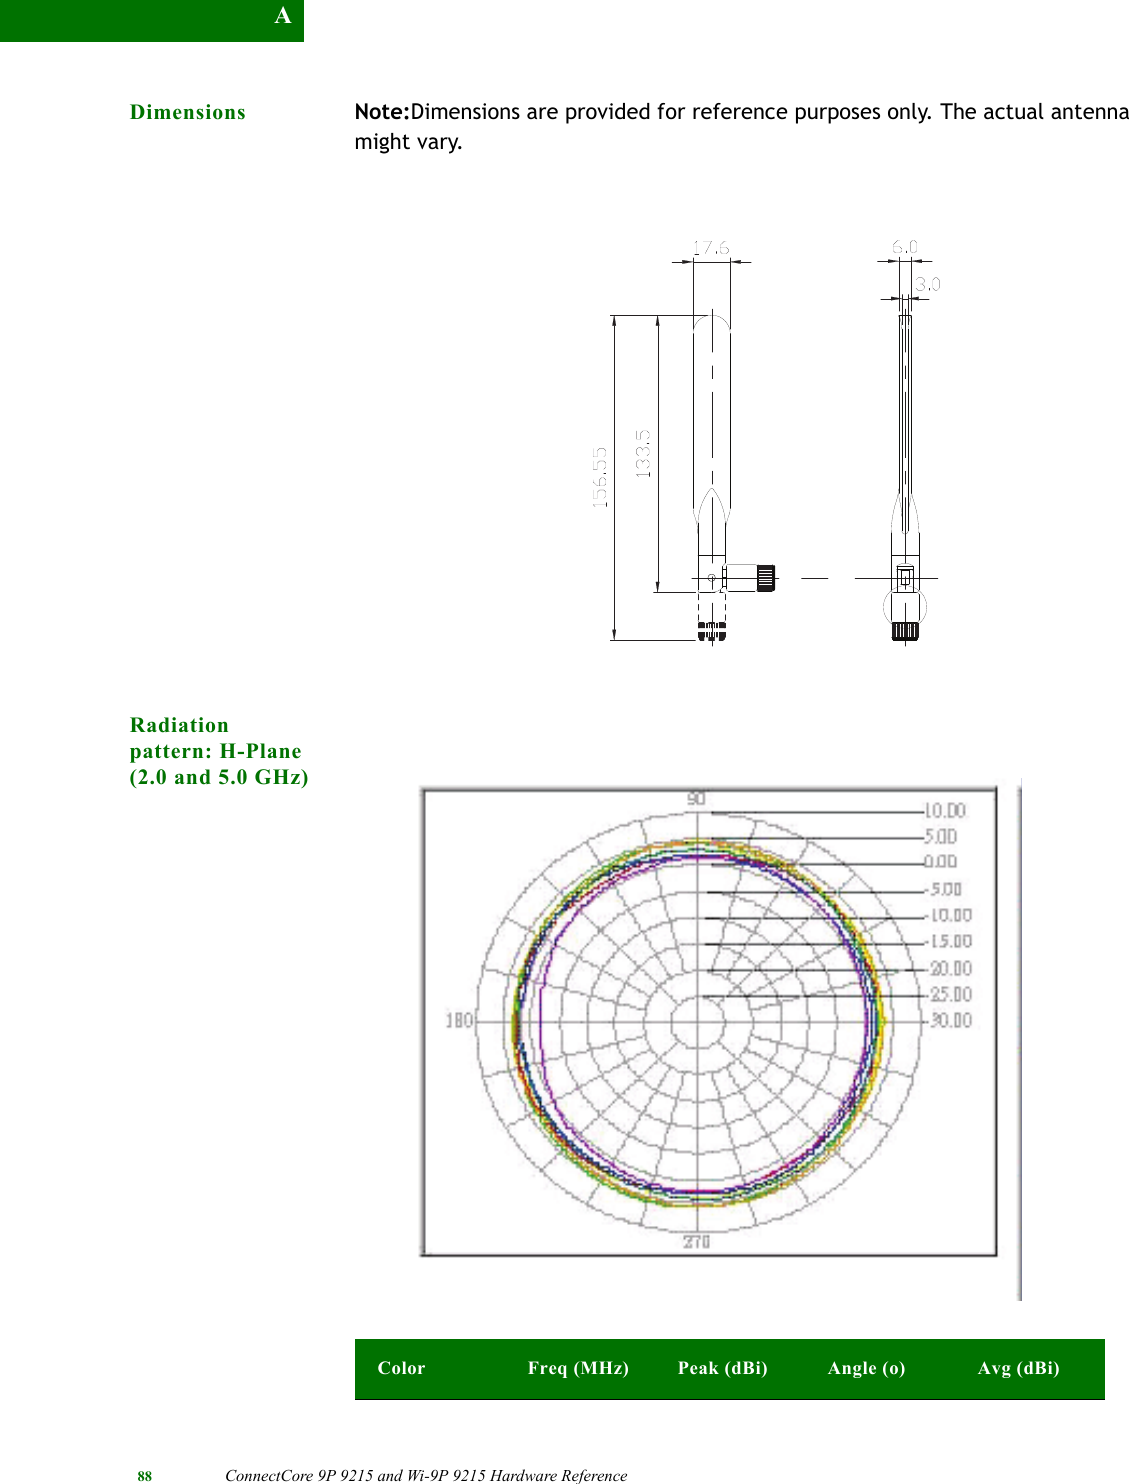 88 ConnectCore 9P 9215 and Wi-9P 9215 Hardware Reference ADimensions Note:Dimensions are provided for reference purposes only. The actual antenna might vary. Radiation pattern: H-Plane (2.0 and 5.0 GHz)Color Freq (MHz) Peak (dBi) Angle (o) Avg (dBi)